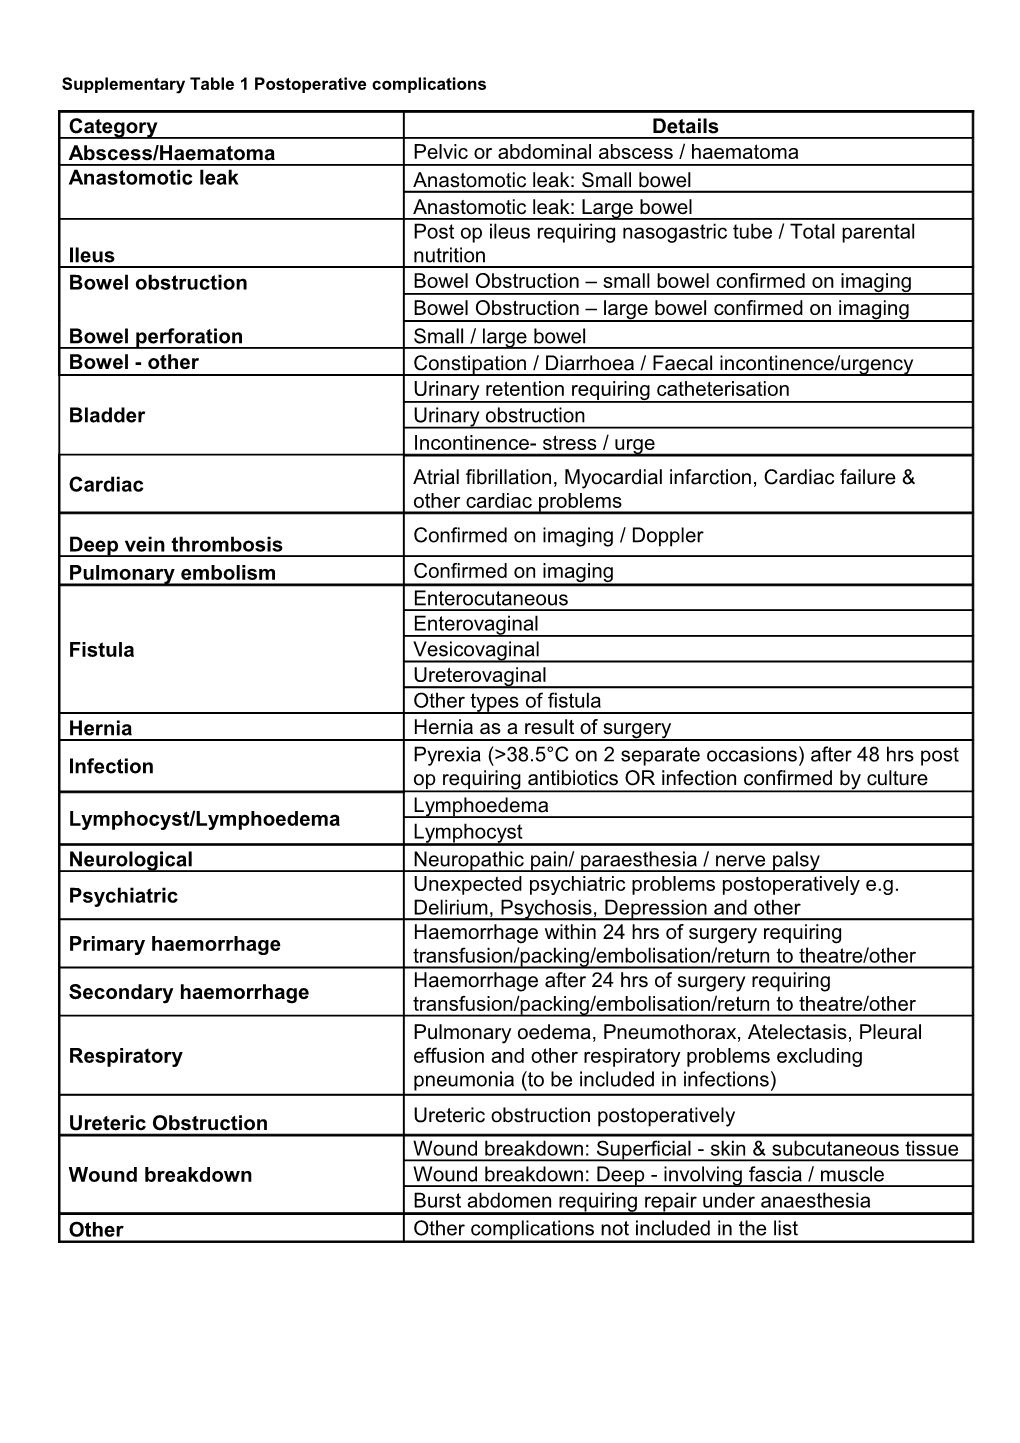 Supplementary Table 1 Postoperative Complications